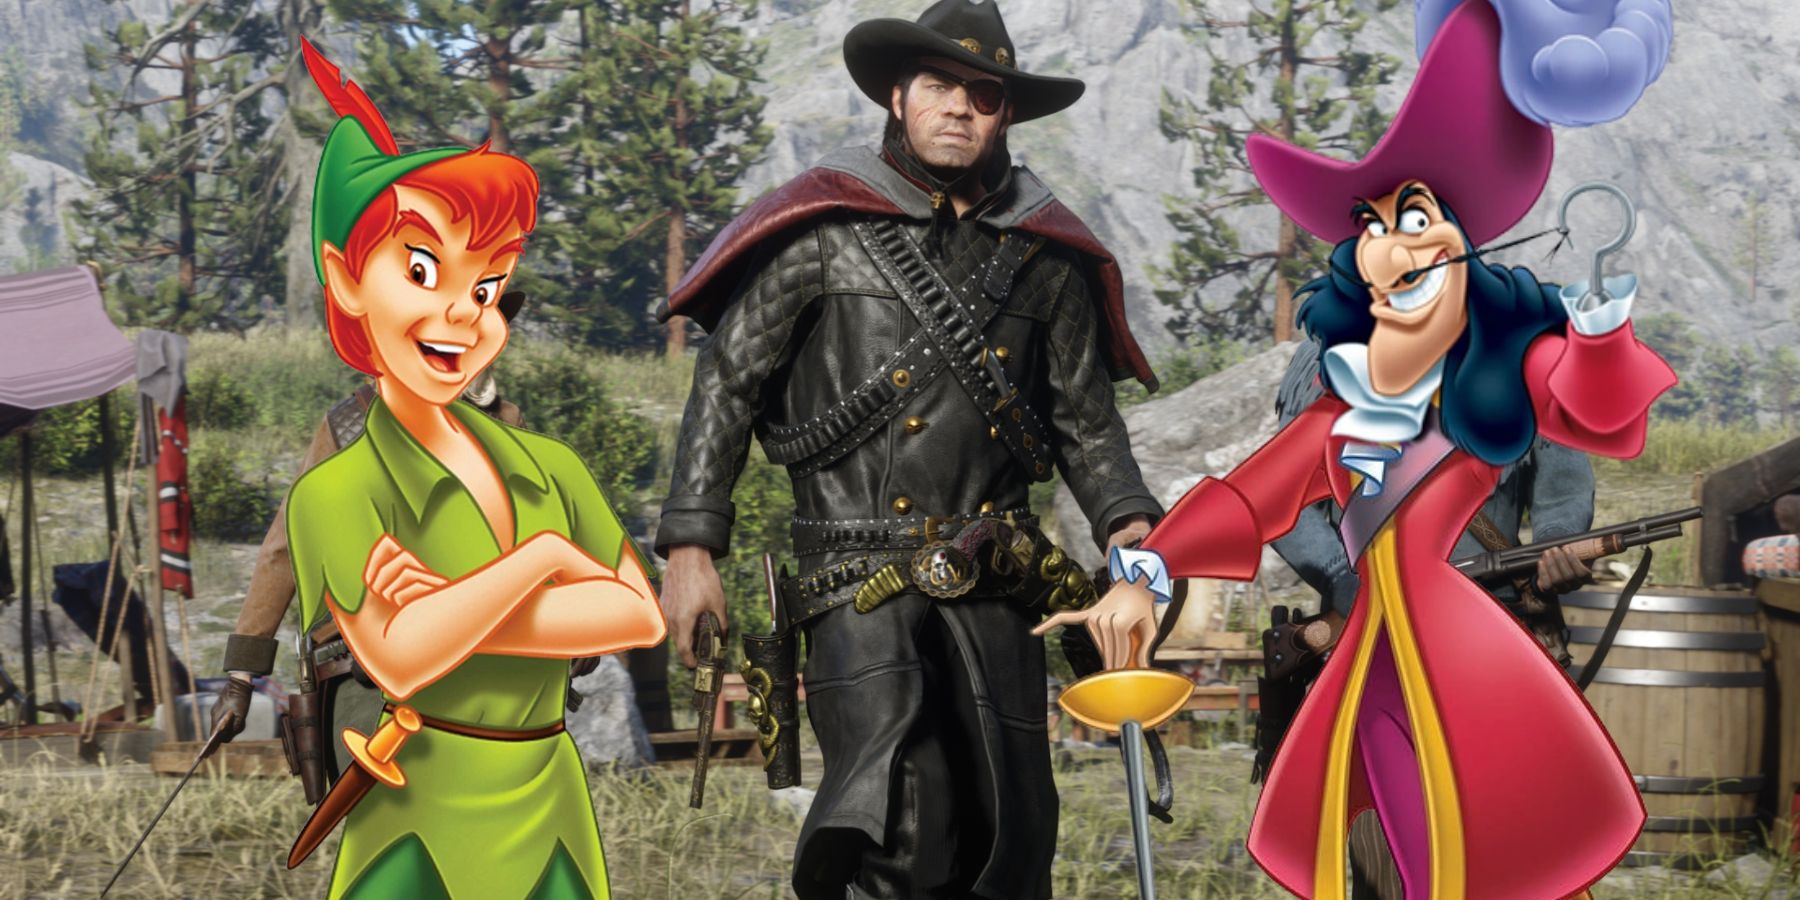 Red Dead Online Players Recreate Peter Pan and Captain Hook in the Game